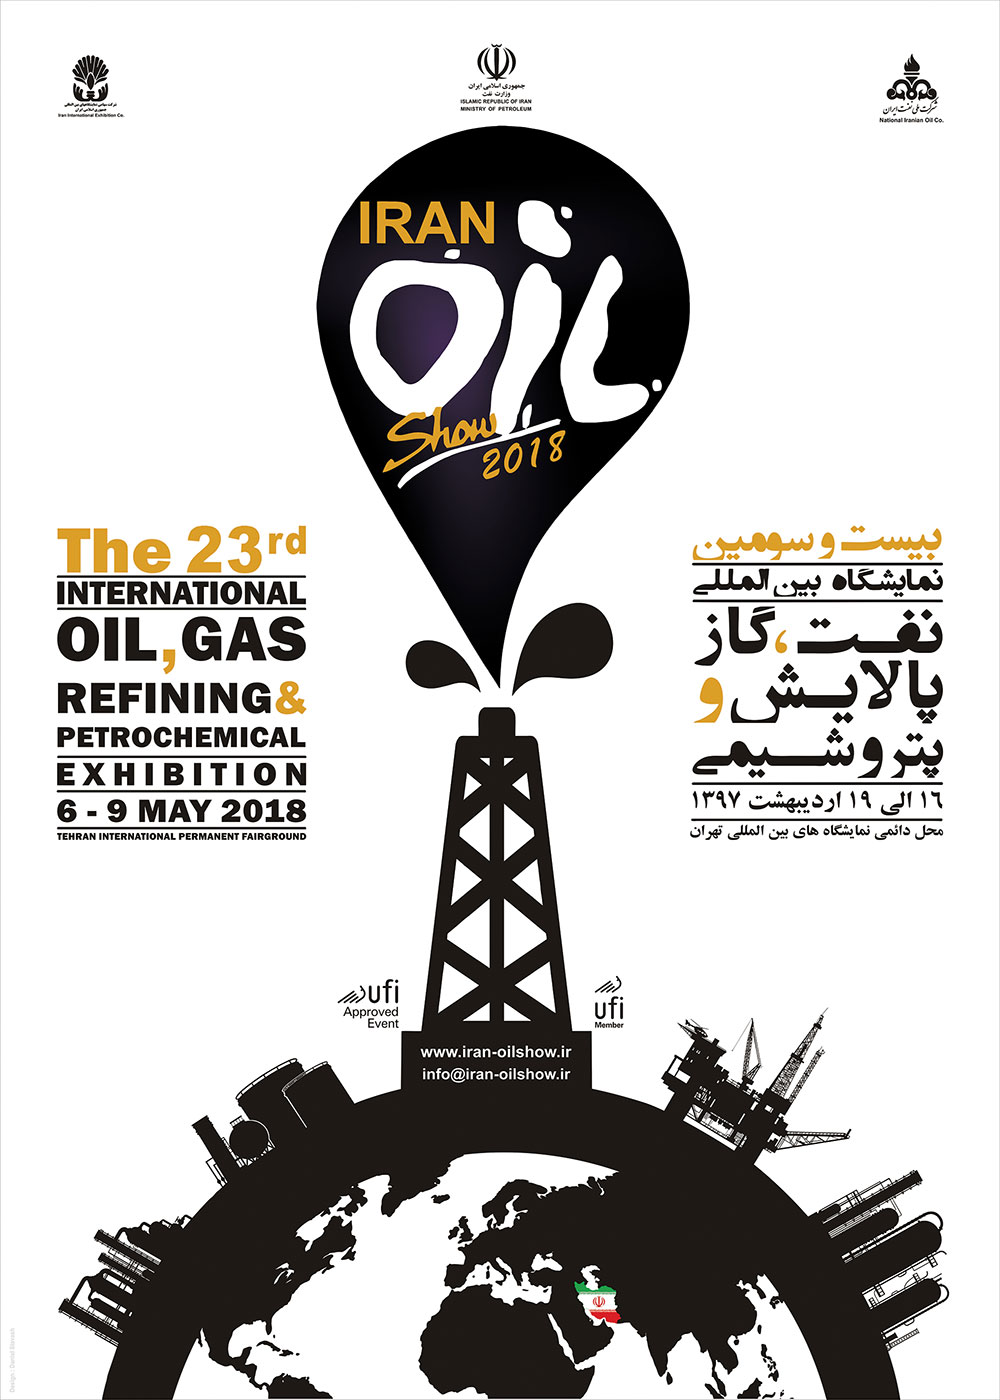 Iran Oil Show to Begin on May 6 Financial Tribune